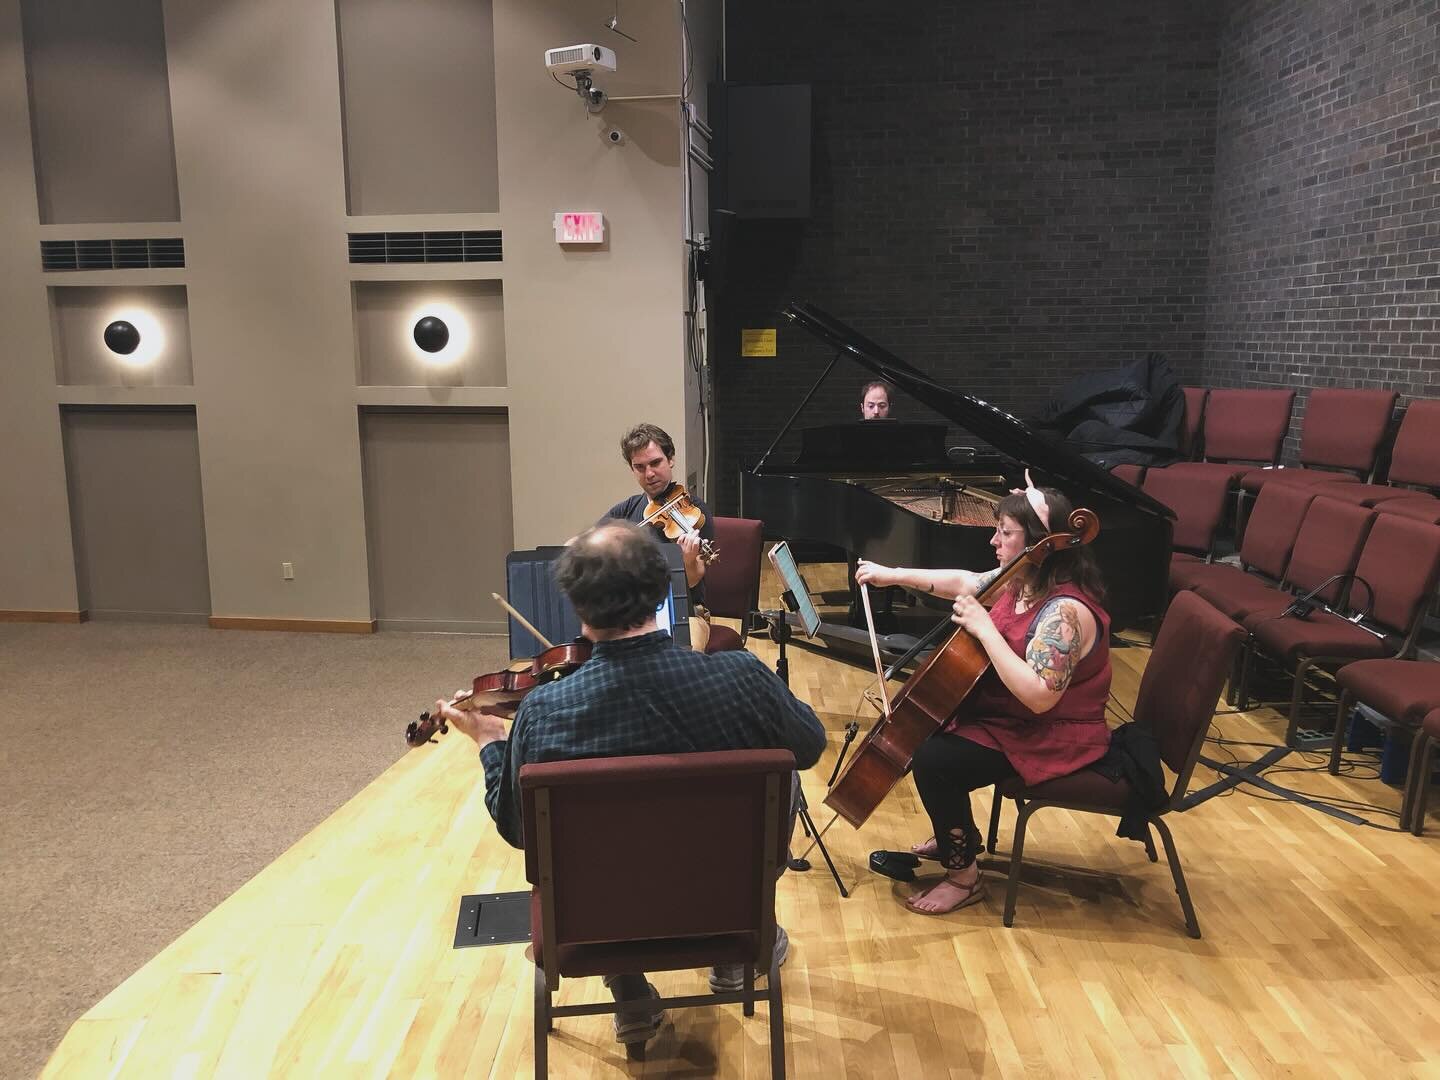 In rehearsal for our last concerts of the season, April 20-21, but also check us out all around town this April with The Haberdasher Prince, a new world premiere family opera, presented by @kcopera !!!